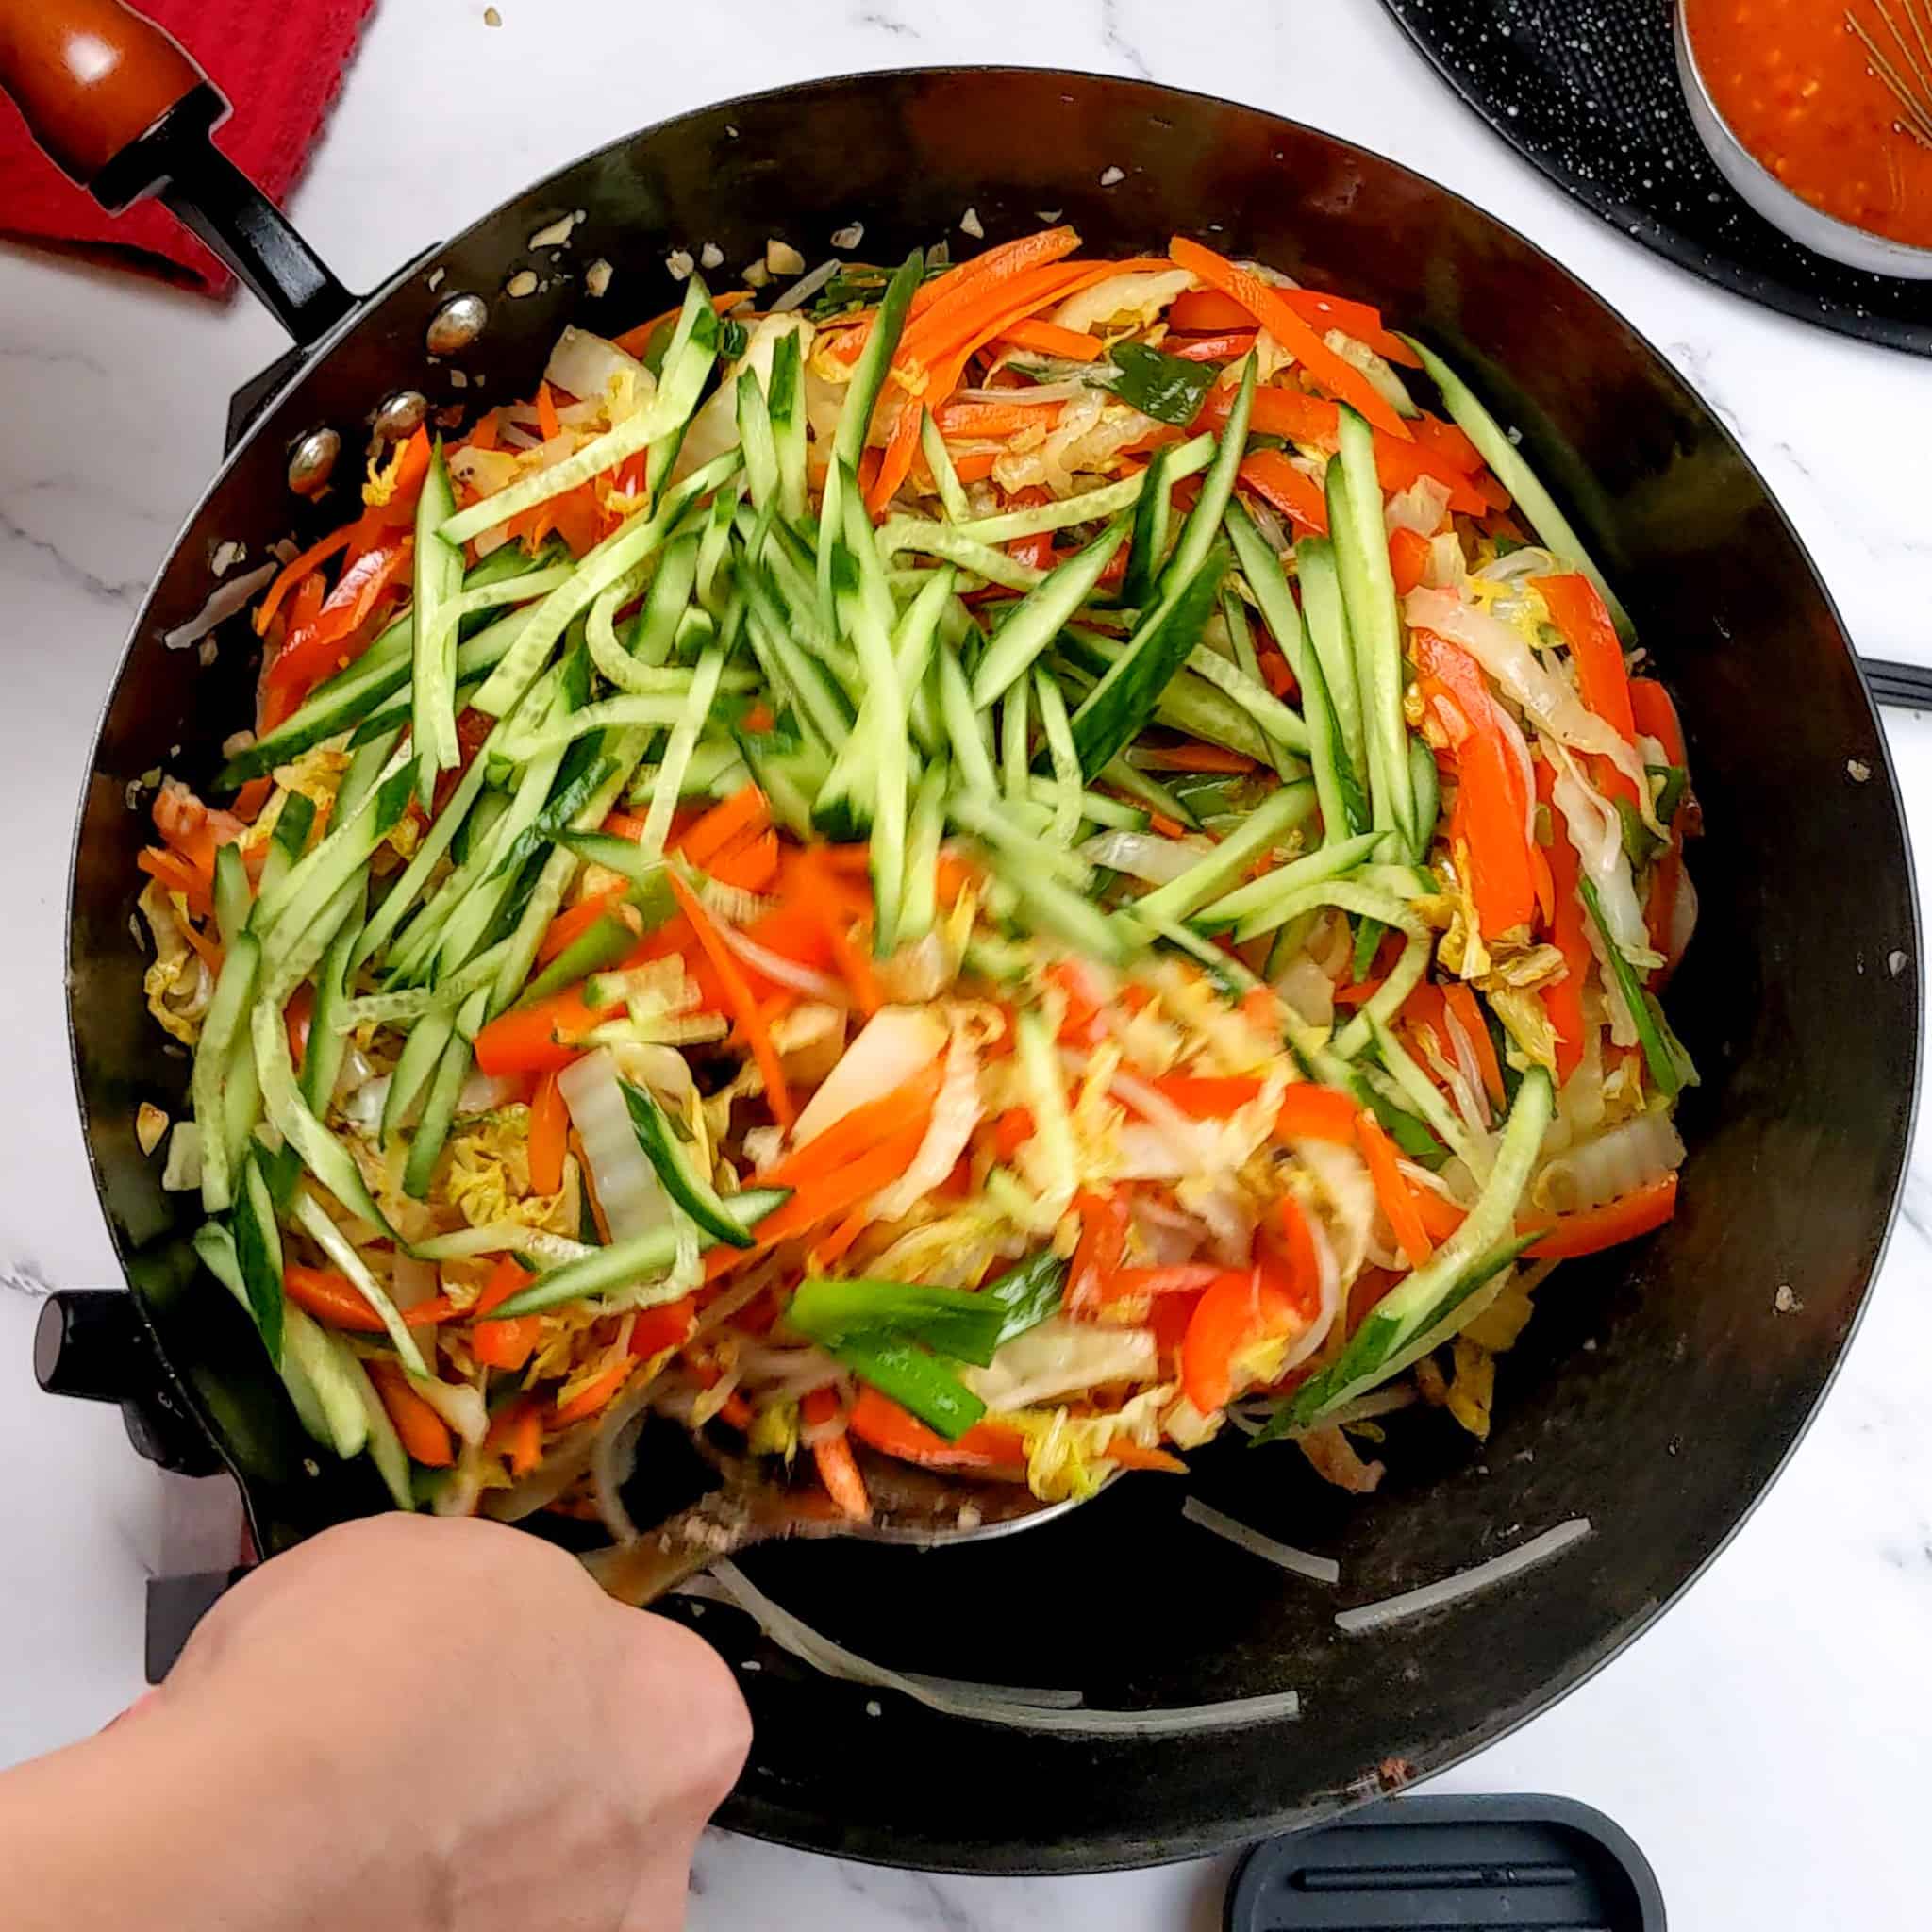 stir fried vegetables and cucumbers added to the wok and are being mixed together with a wok spatula.